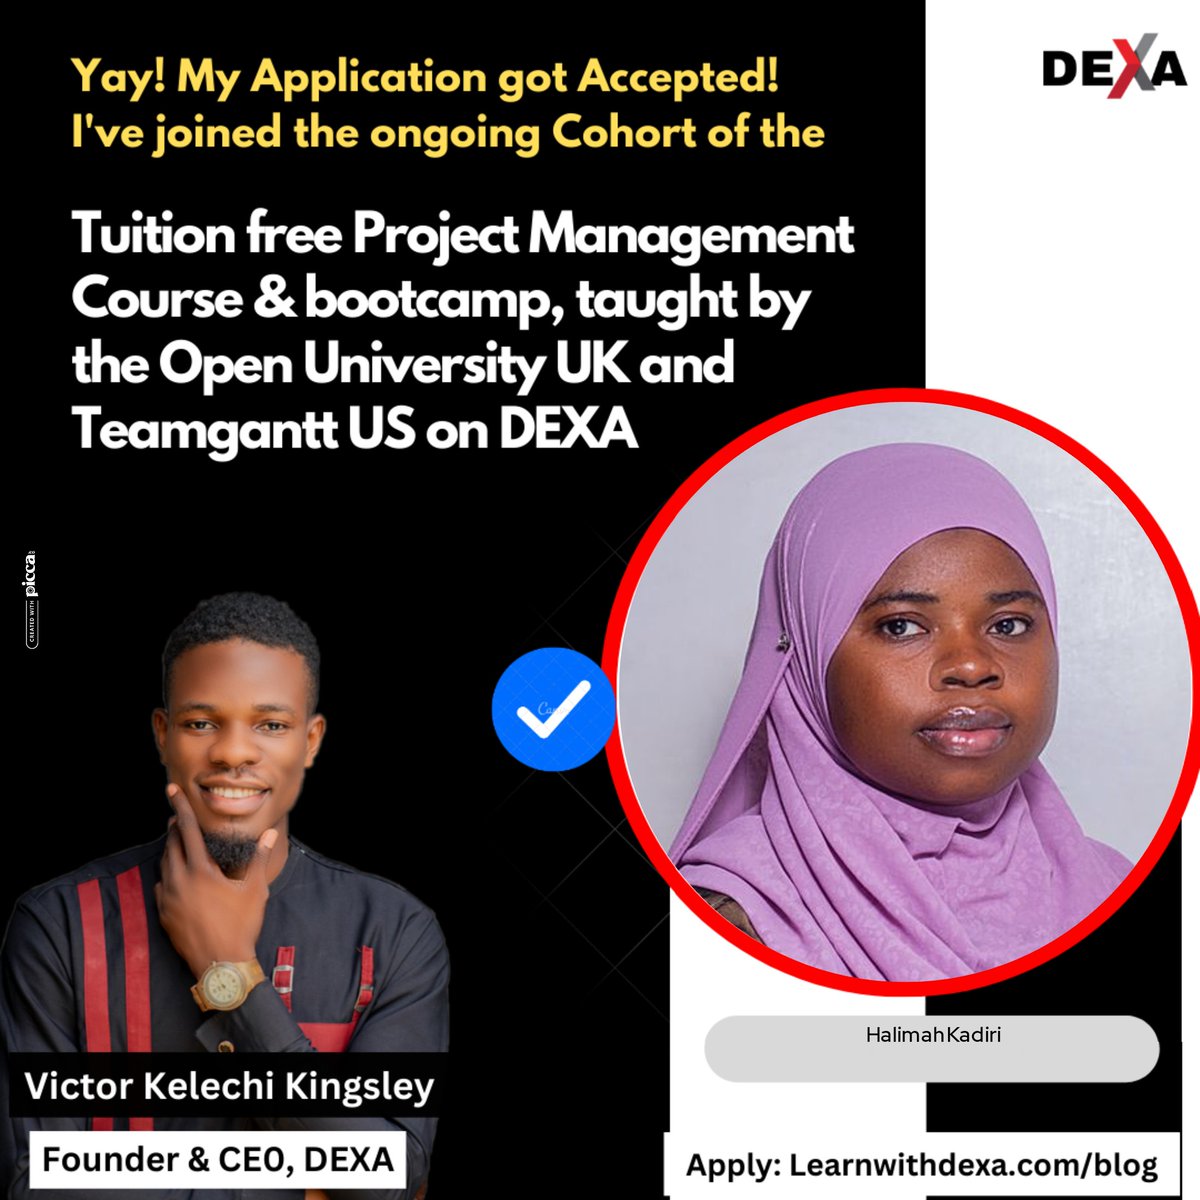 Excited to announce my enrollment in the tuition free Project Management course taught by The Open University UK & TeamGantt. I applied through: DEXA Bracing myself for a journey of learning & growth as an emerging project manager @#LearnwithDEXA #ProjectManagement